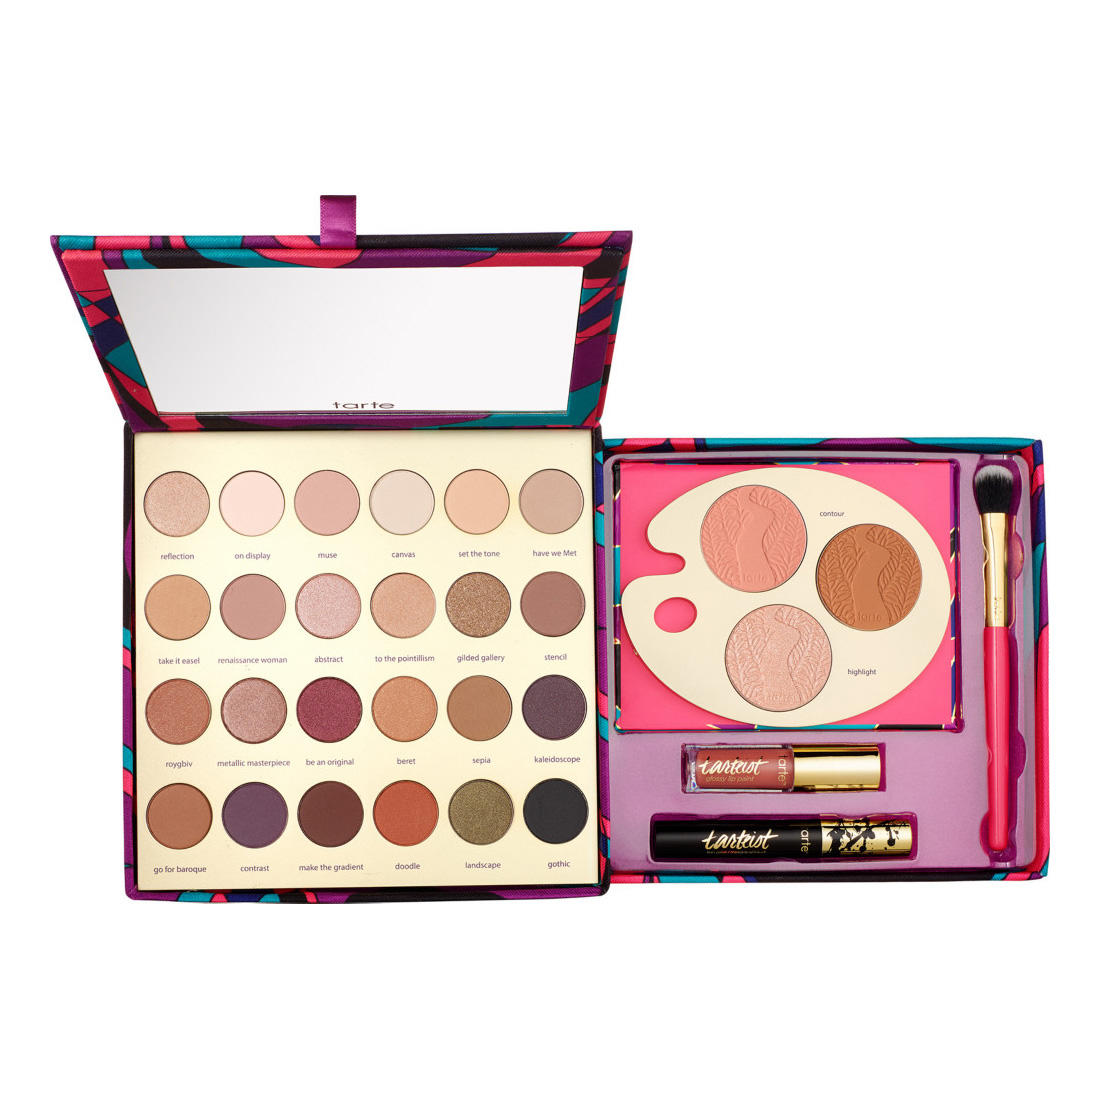 Tarte Tarteist Paint Palette Collector's Set (Without Accessories)